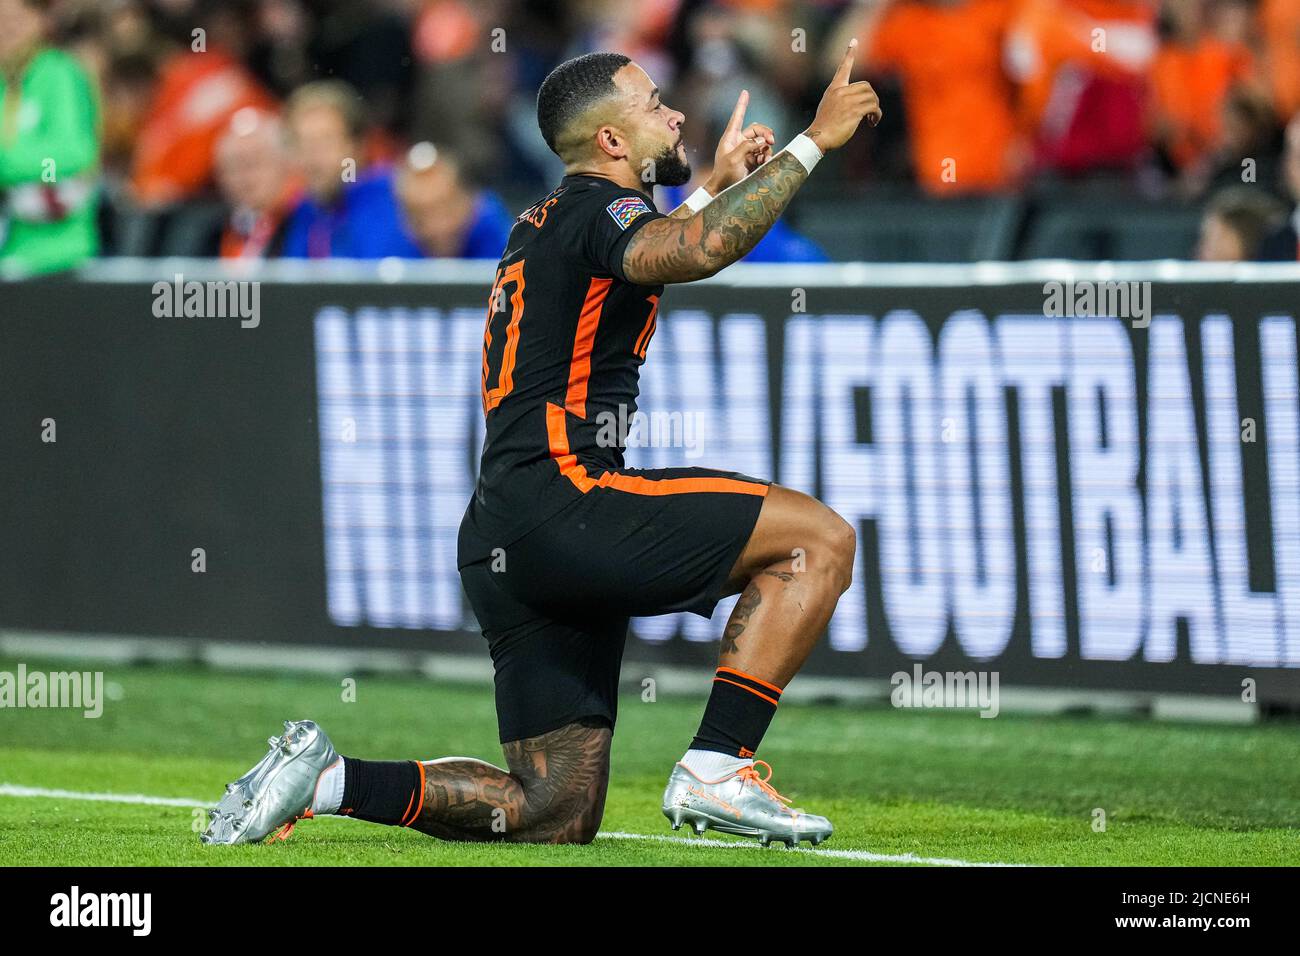 Rotterdam, Netherlands. 14 June 2022, Rotterdam, Netherlands. 14 June 2022, Memphis Depay of Holland celebrates the 3-2 during the match between Holland v Wales at Stadion Feijenoord de Kuip on 14 June 2022 in Rotterdam, Netherlands. (Box to Box Pictures/Yannick Verhoeven) Stock Photo